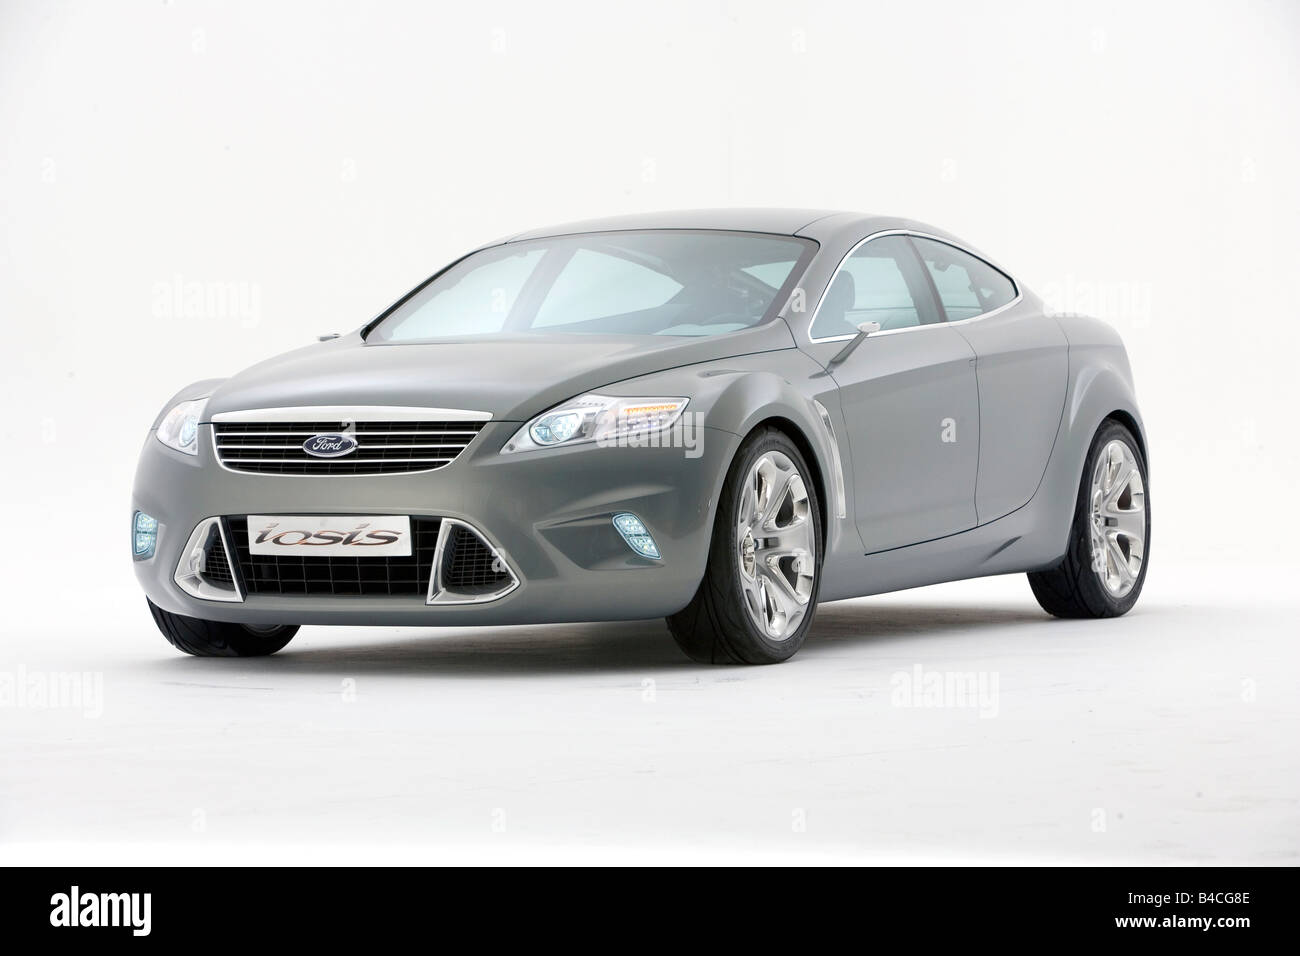 Car, Ford Iosis IAA 2005 Study, silver, roadster, coupe/Coupe, Studio admission, standing, upholding, diagonal from the front, F Stock Photo